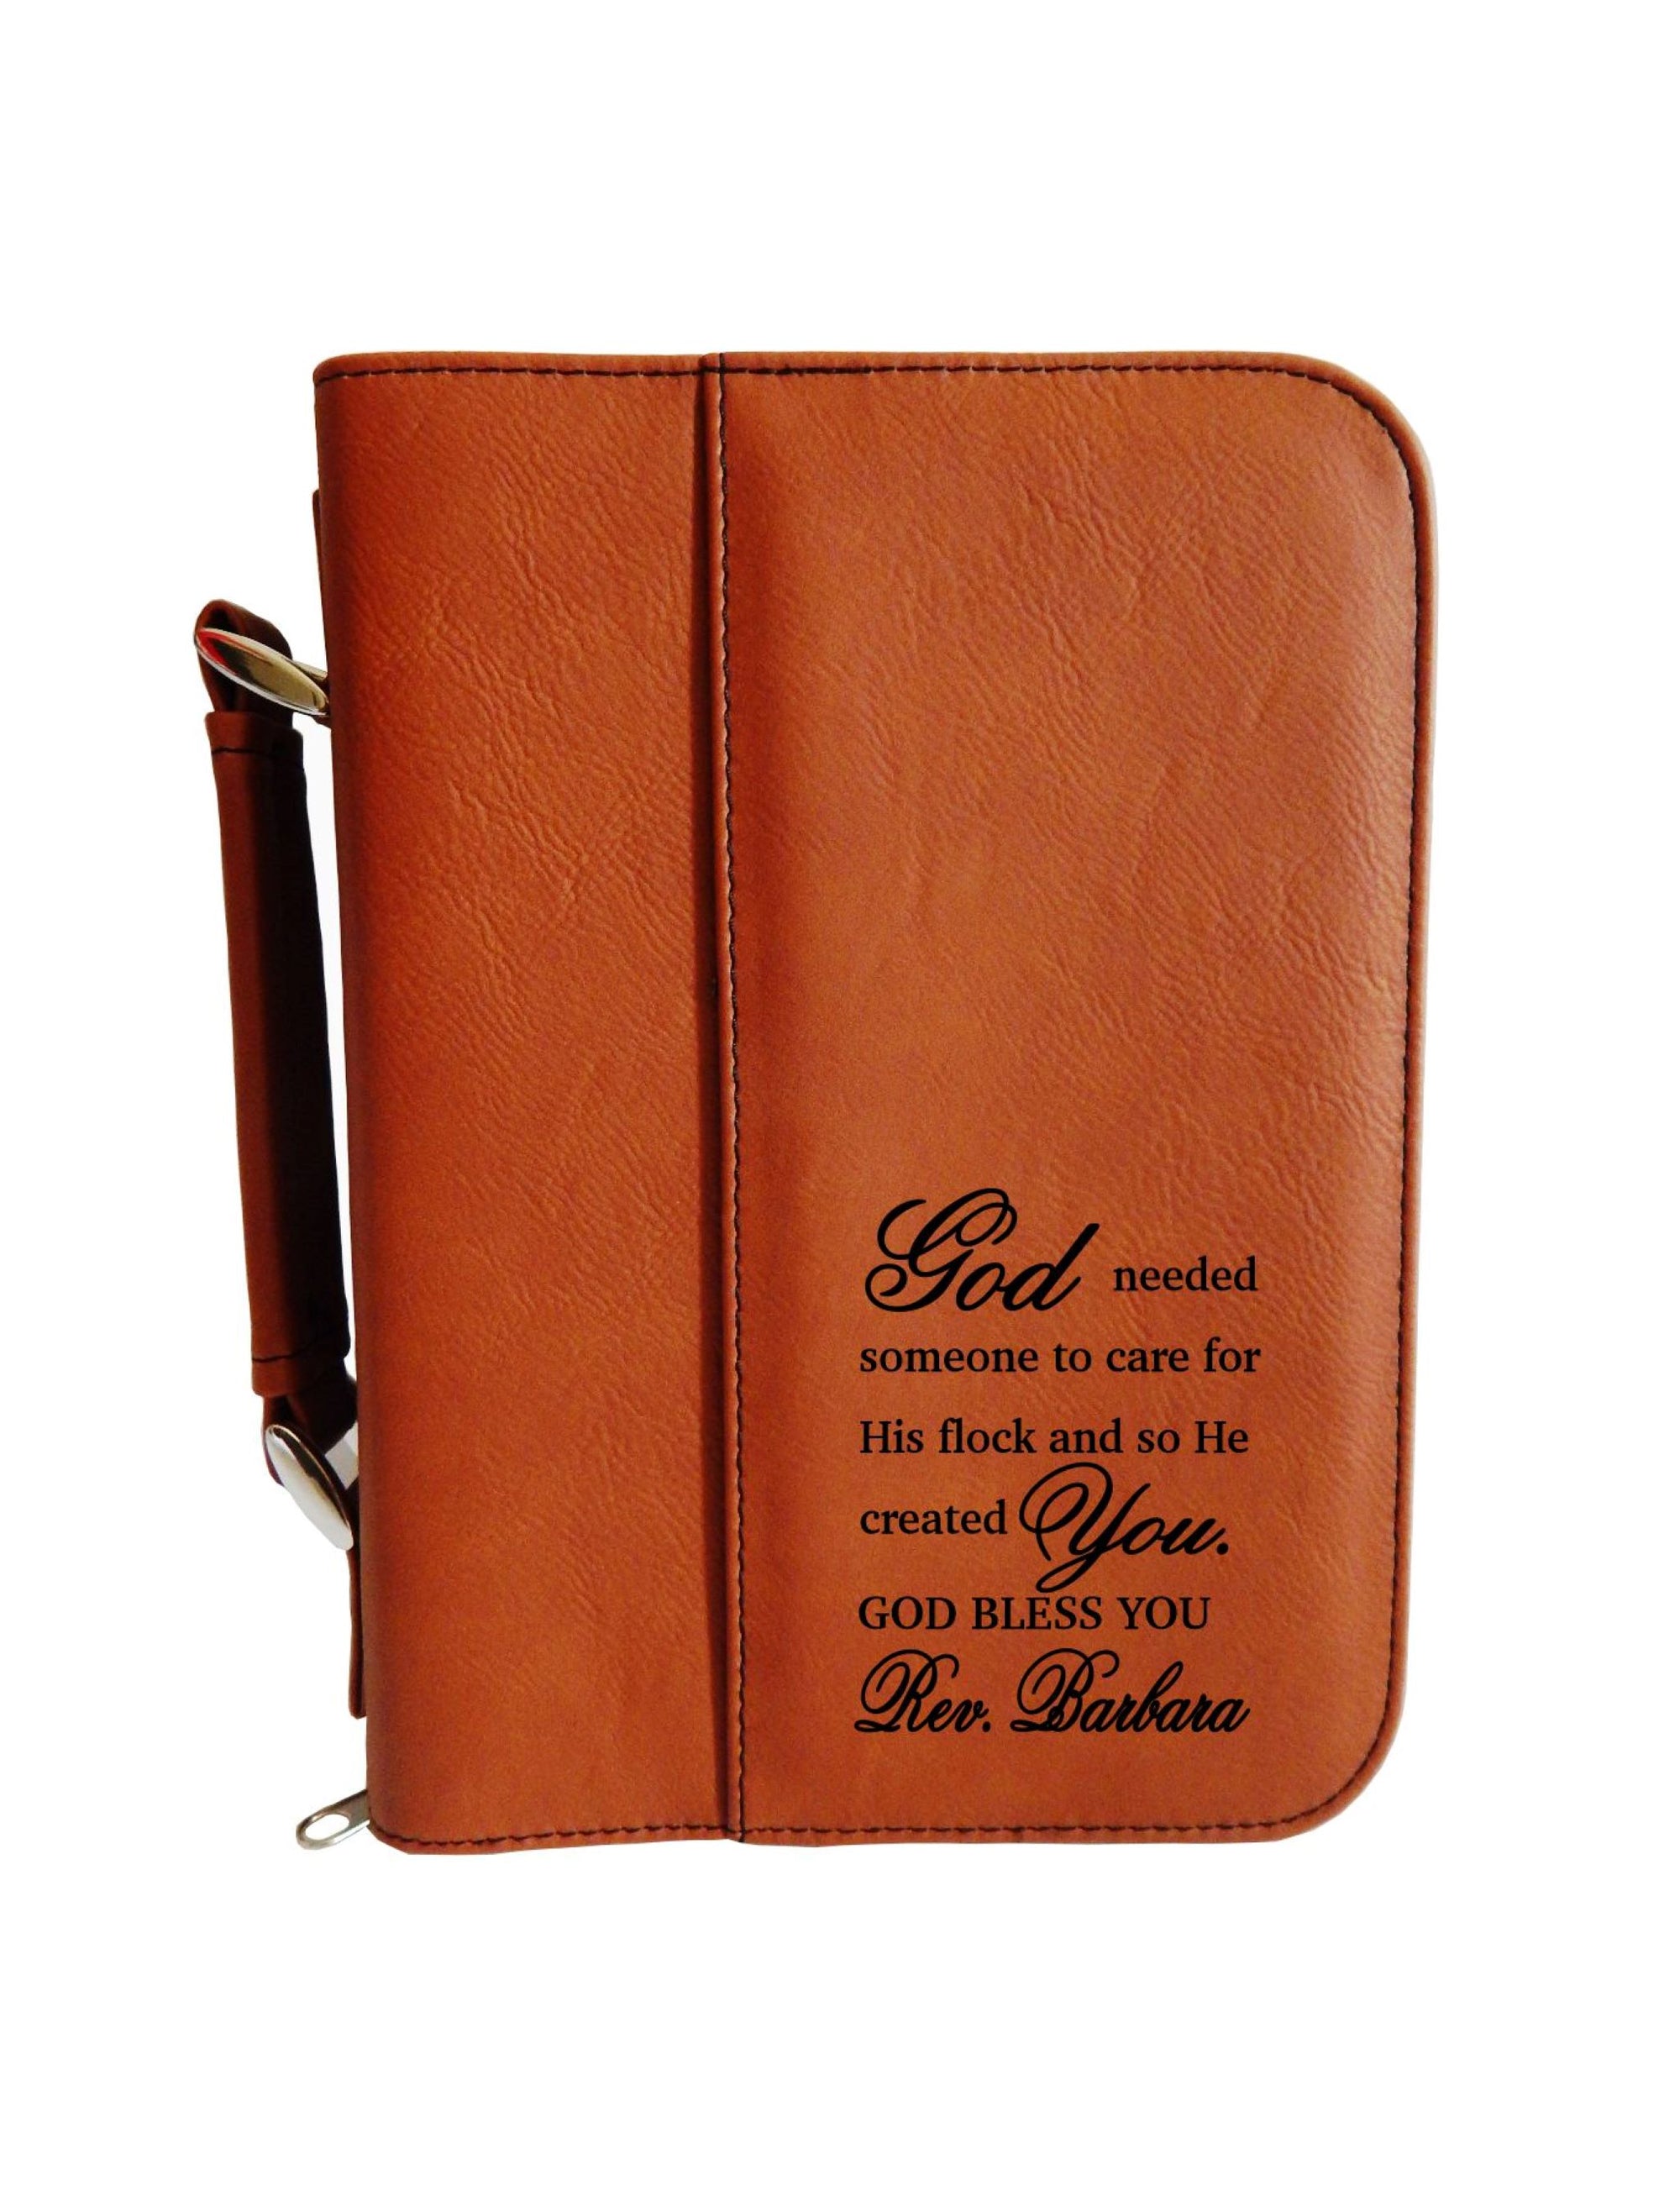 Religious Gift for Reverend | Christian Gift for Pastor | Personalized Bible Cover BCL009